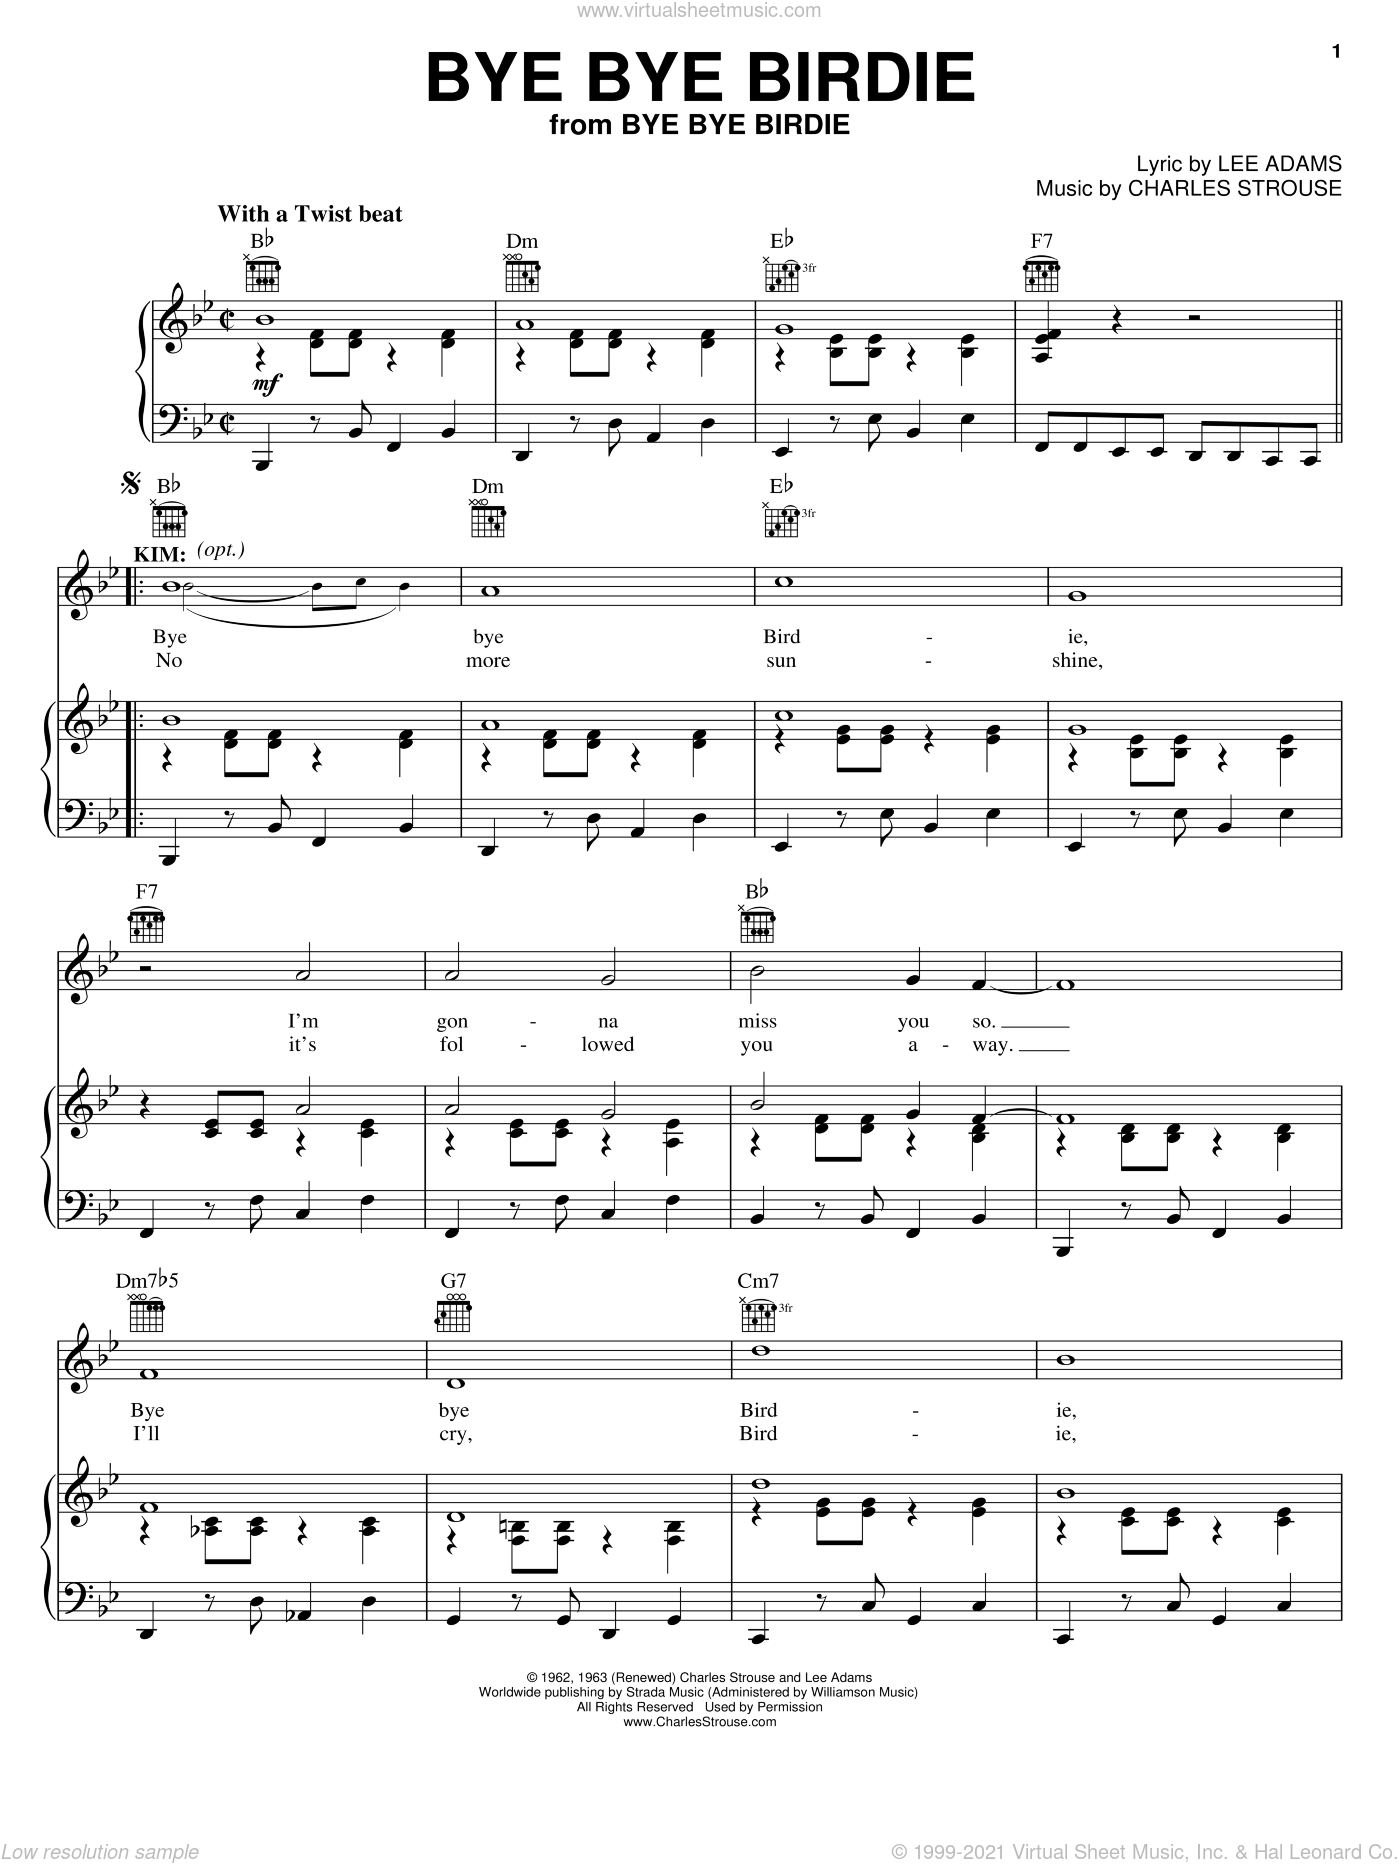 A Healthy, Normal American Boy (We Love You, Conrad) by Charles Strouse -  Piano, Vocal, Guitar - Digital Sheet Music